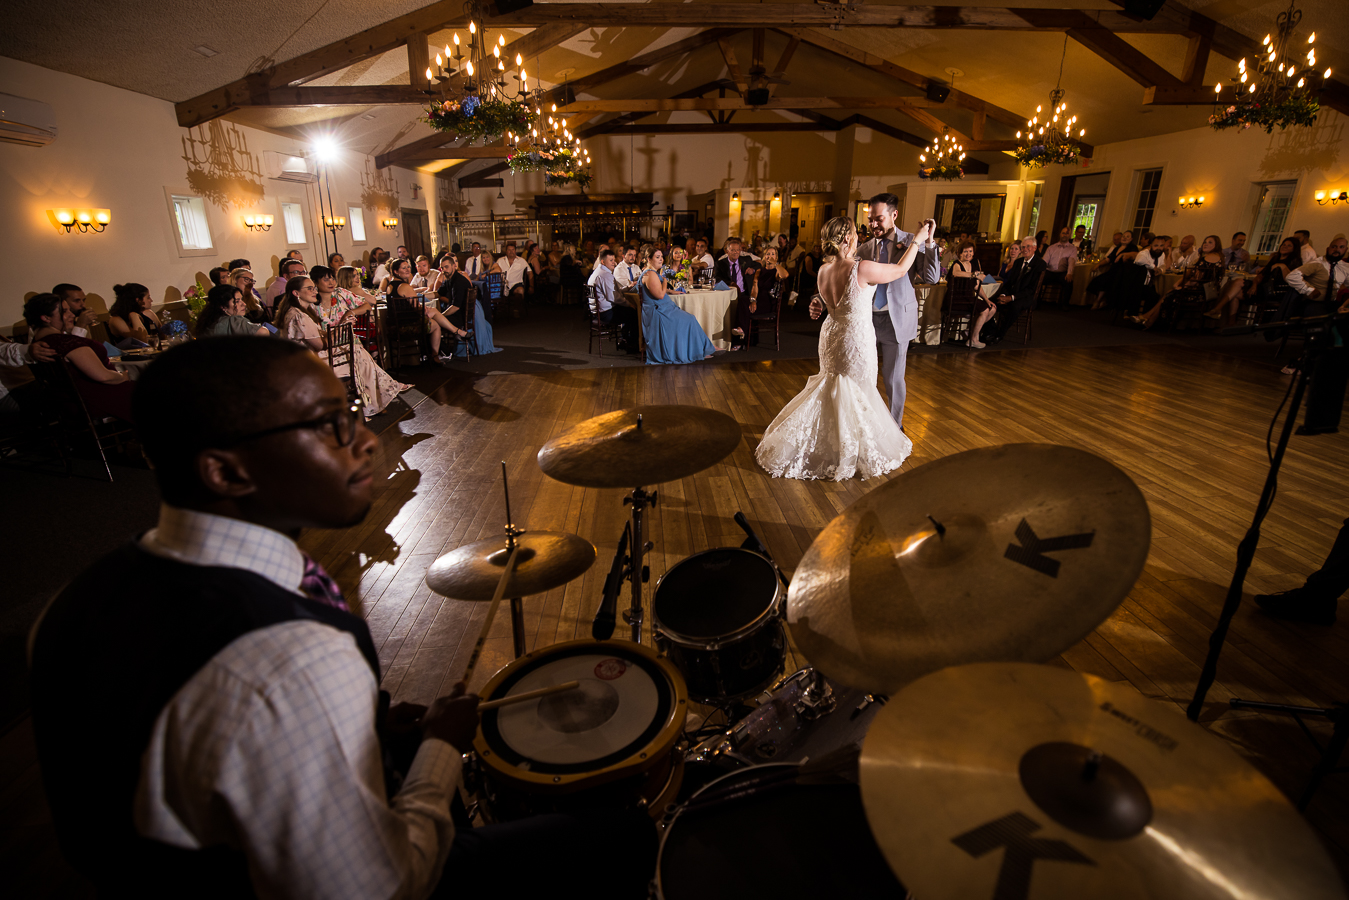 Holly Hedge Estate Wedding Photographer, lisa rhinehart, captures the couple as they share their first dance from a creative angle with the band in the image as well 